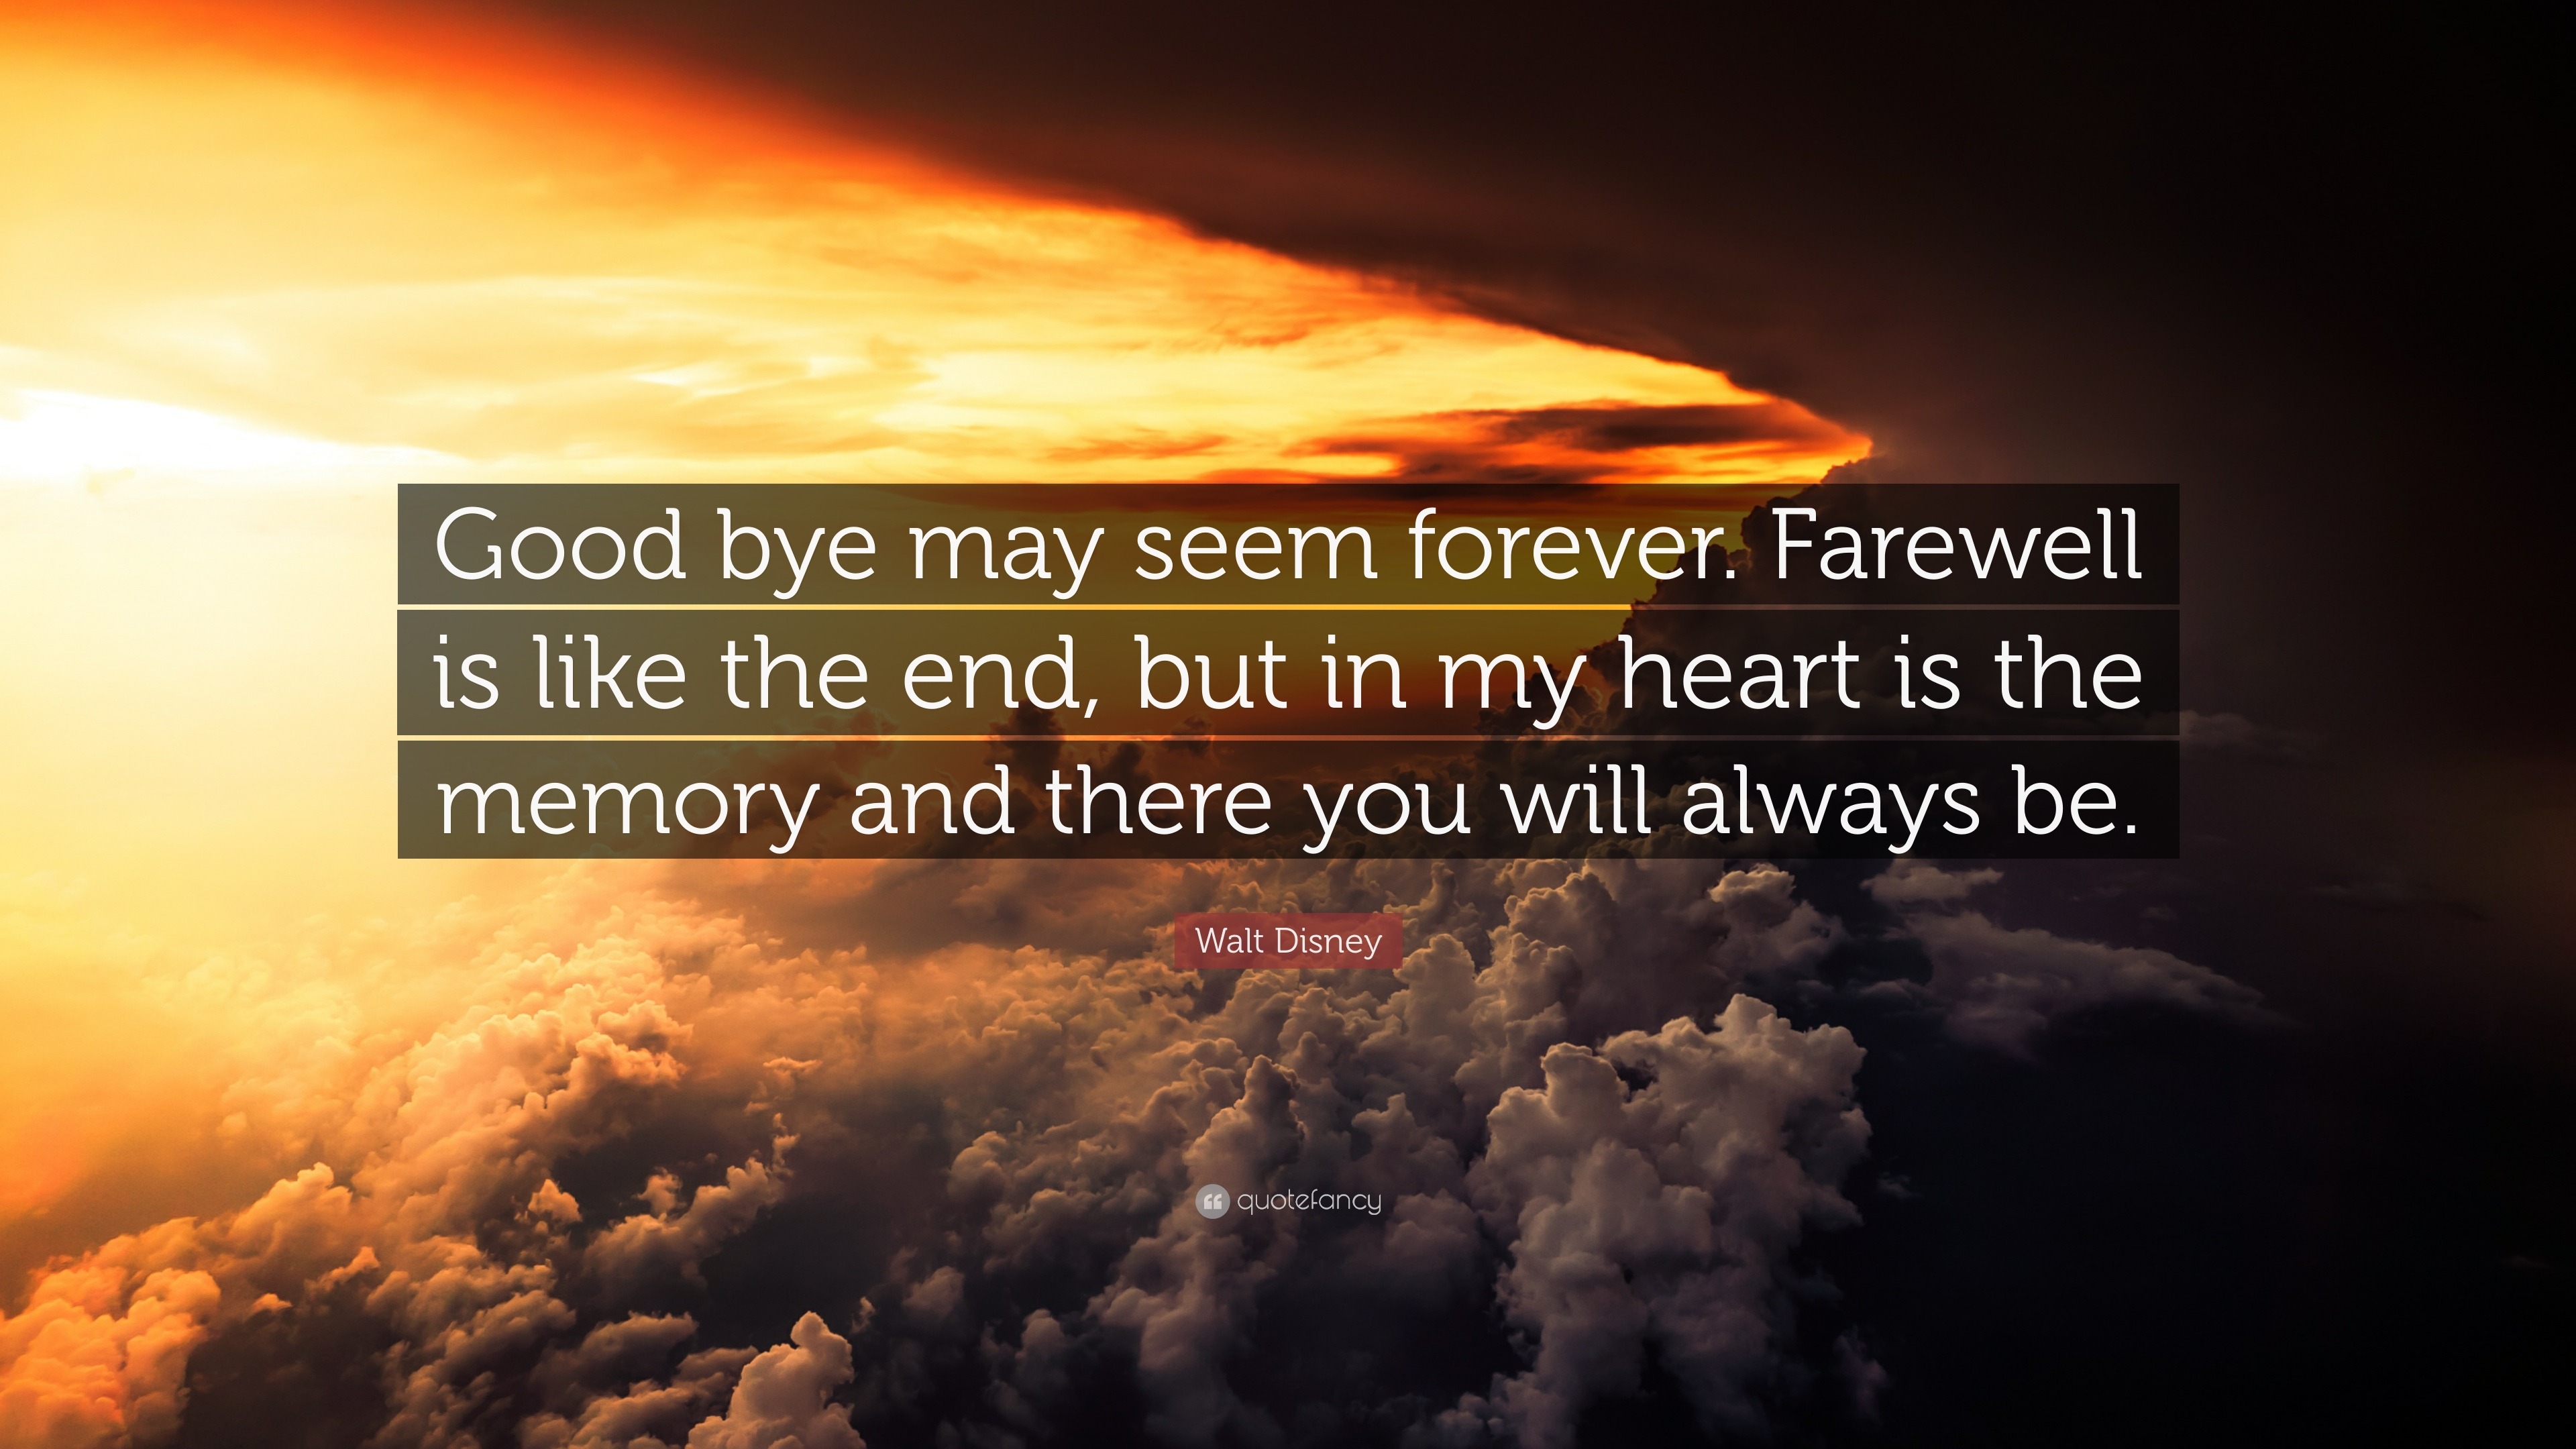 Walt Disney Quote: “Good bye may seem forever. Farewell is like the end